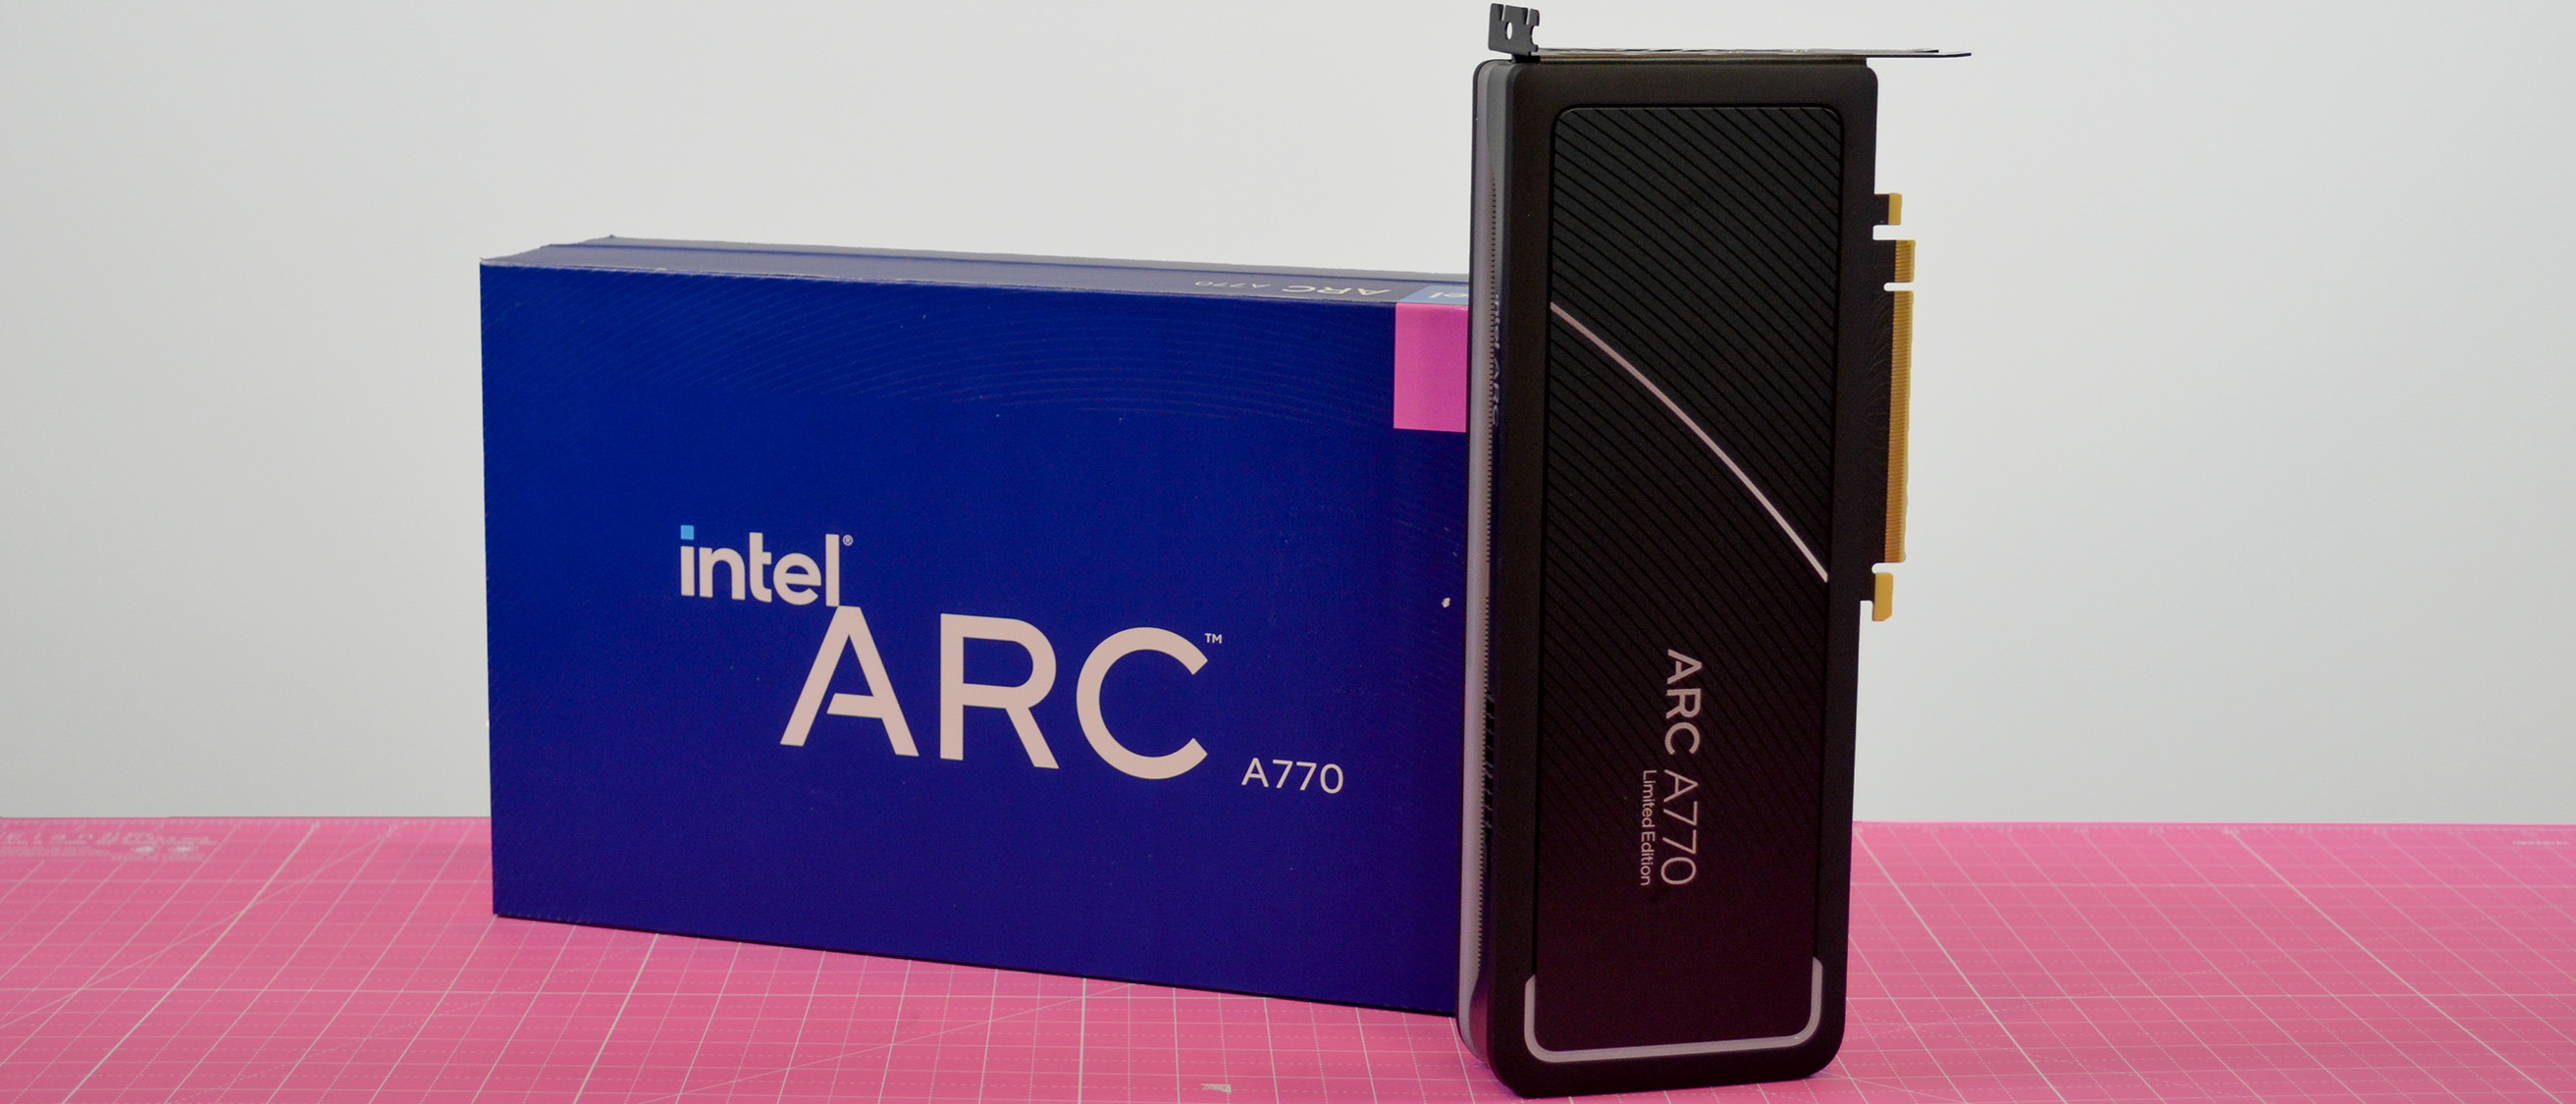 Intel Arc A770 review: a great 1440p graphics card for those on a